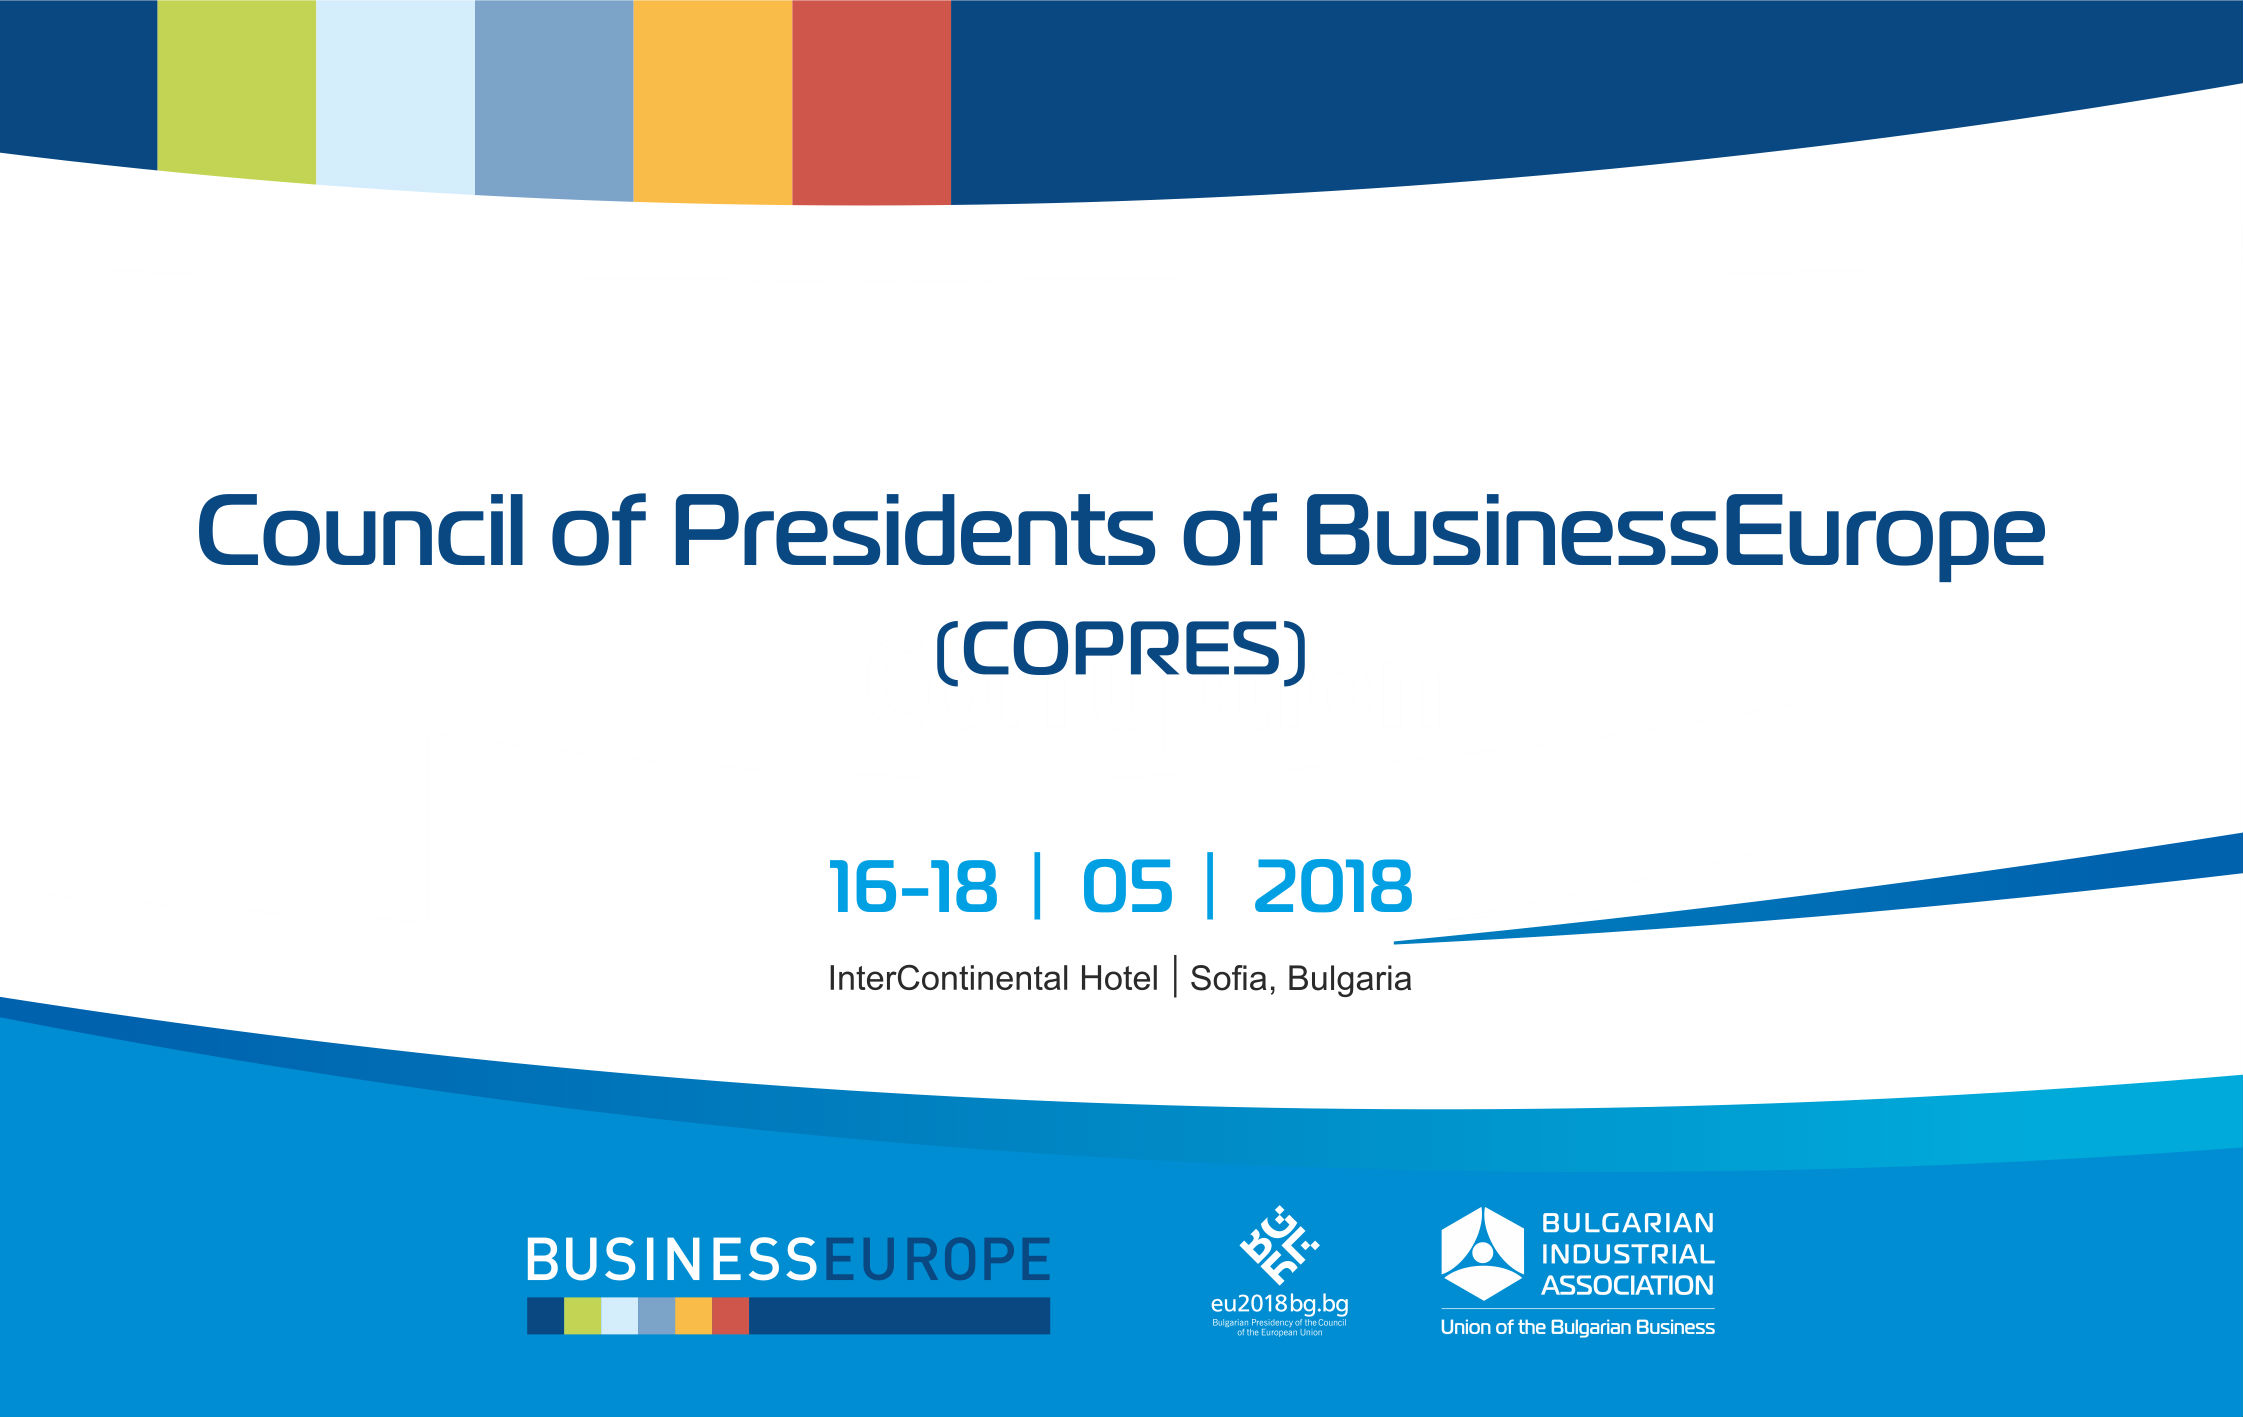 COUNCIL OF PRESIDENTS OF BUSINESSEUROPE (COPRES)